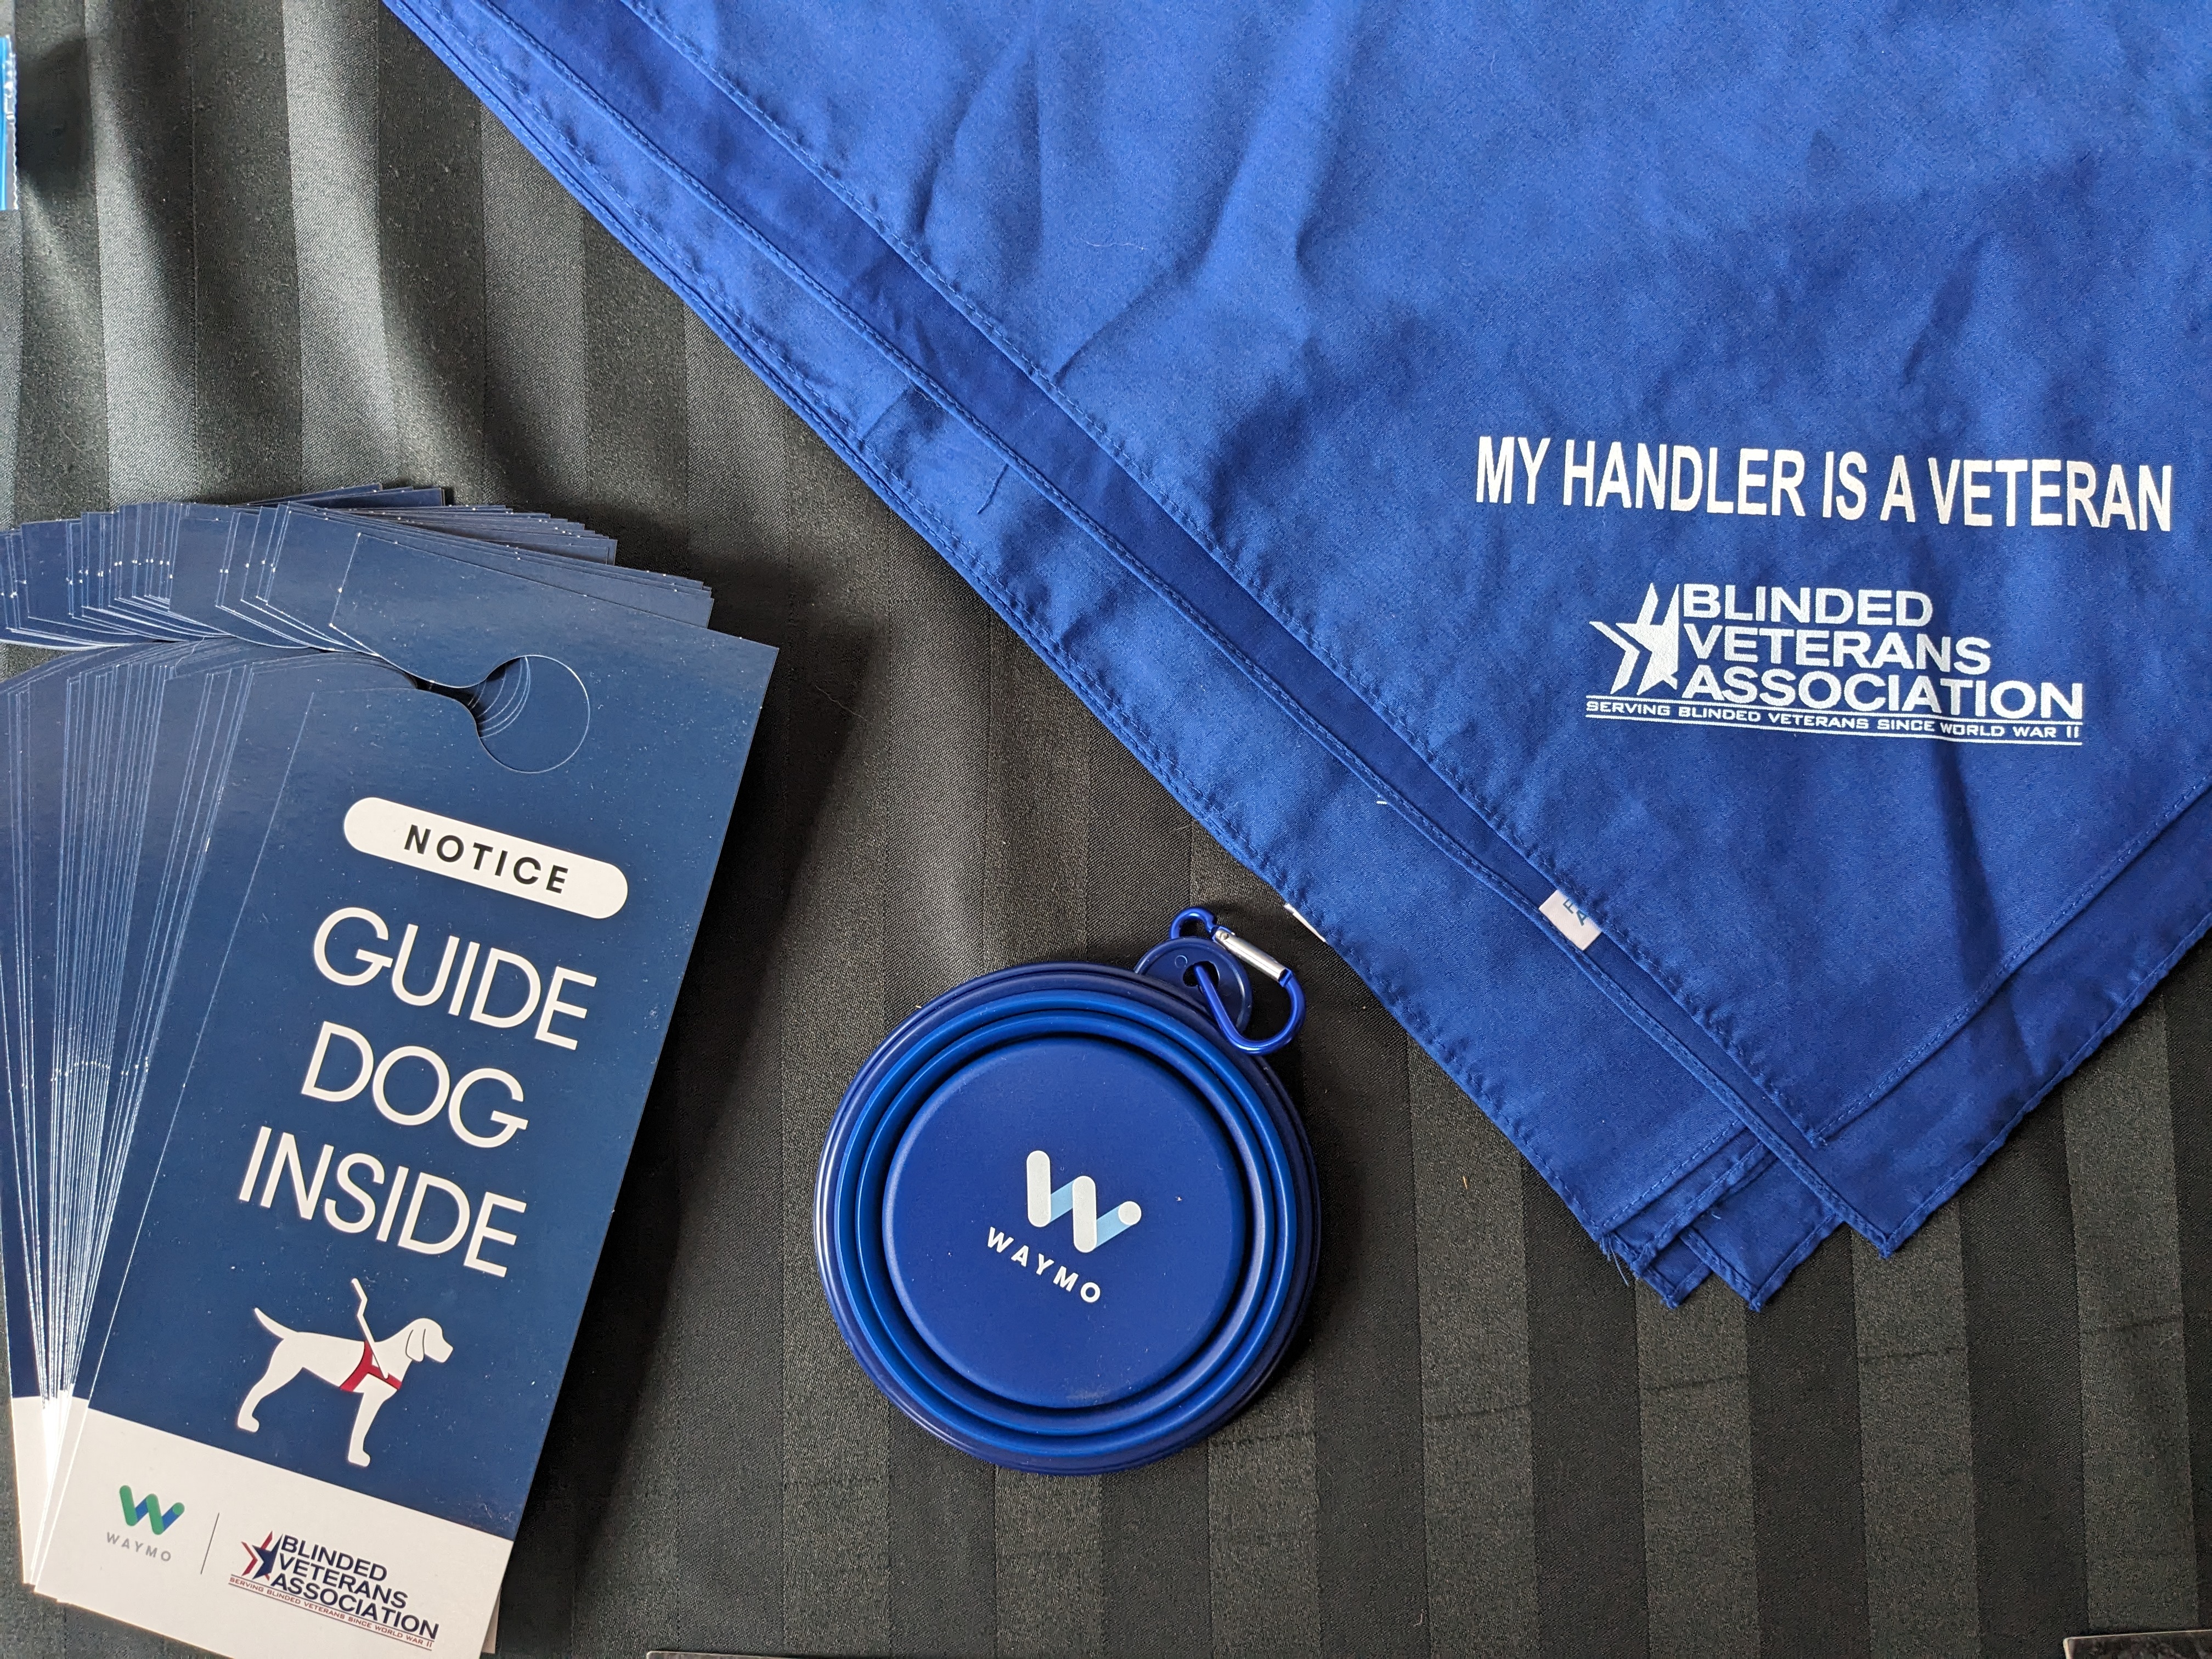 "Guide Dog Inside" Door hanger, Waymo branded collapsible water bowl, and BVA branded dog bandana laid out on a table